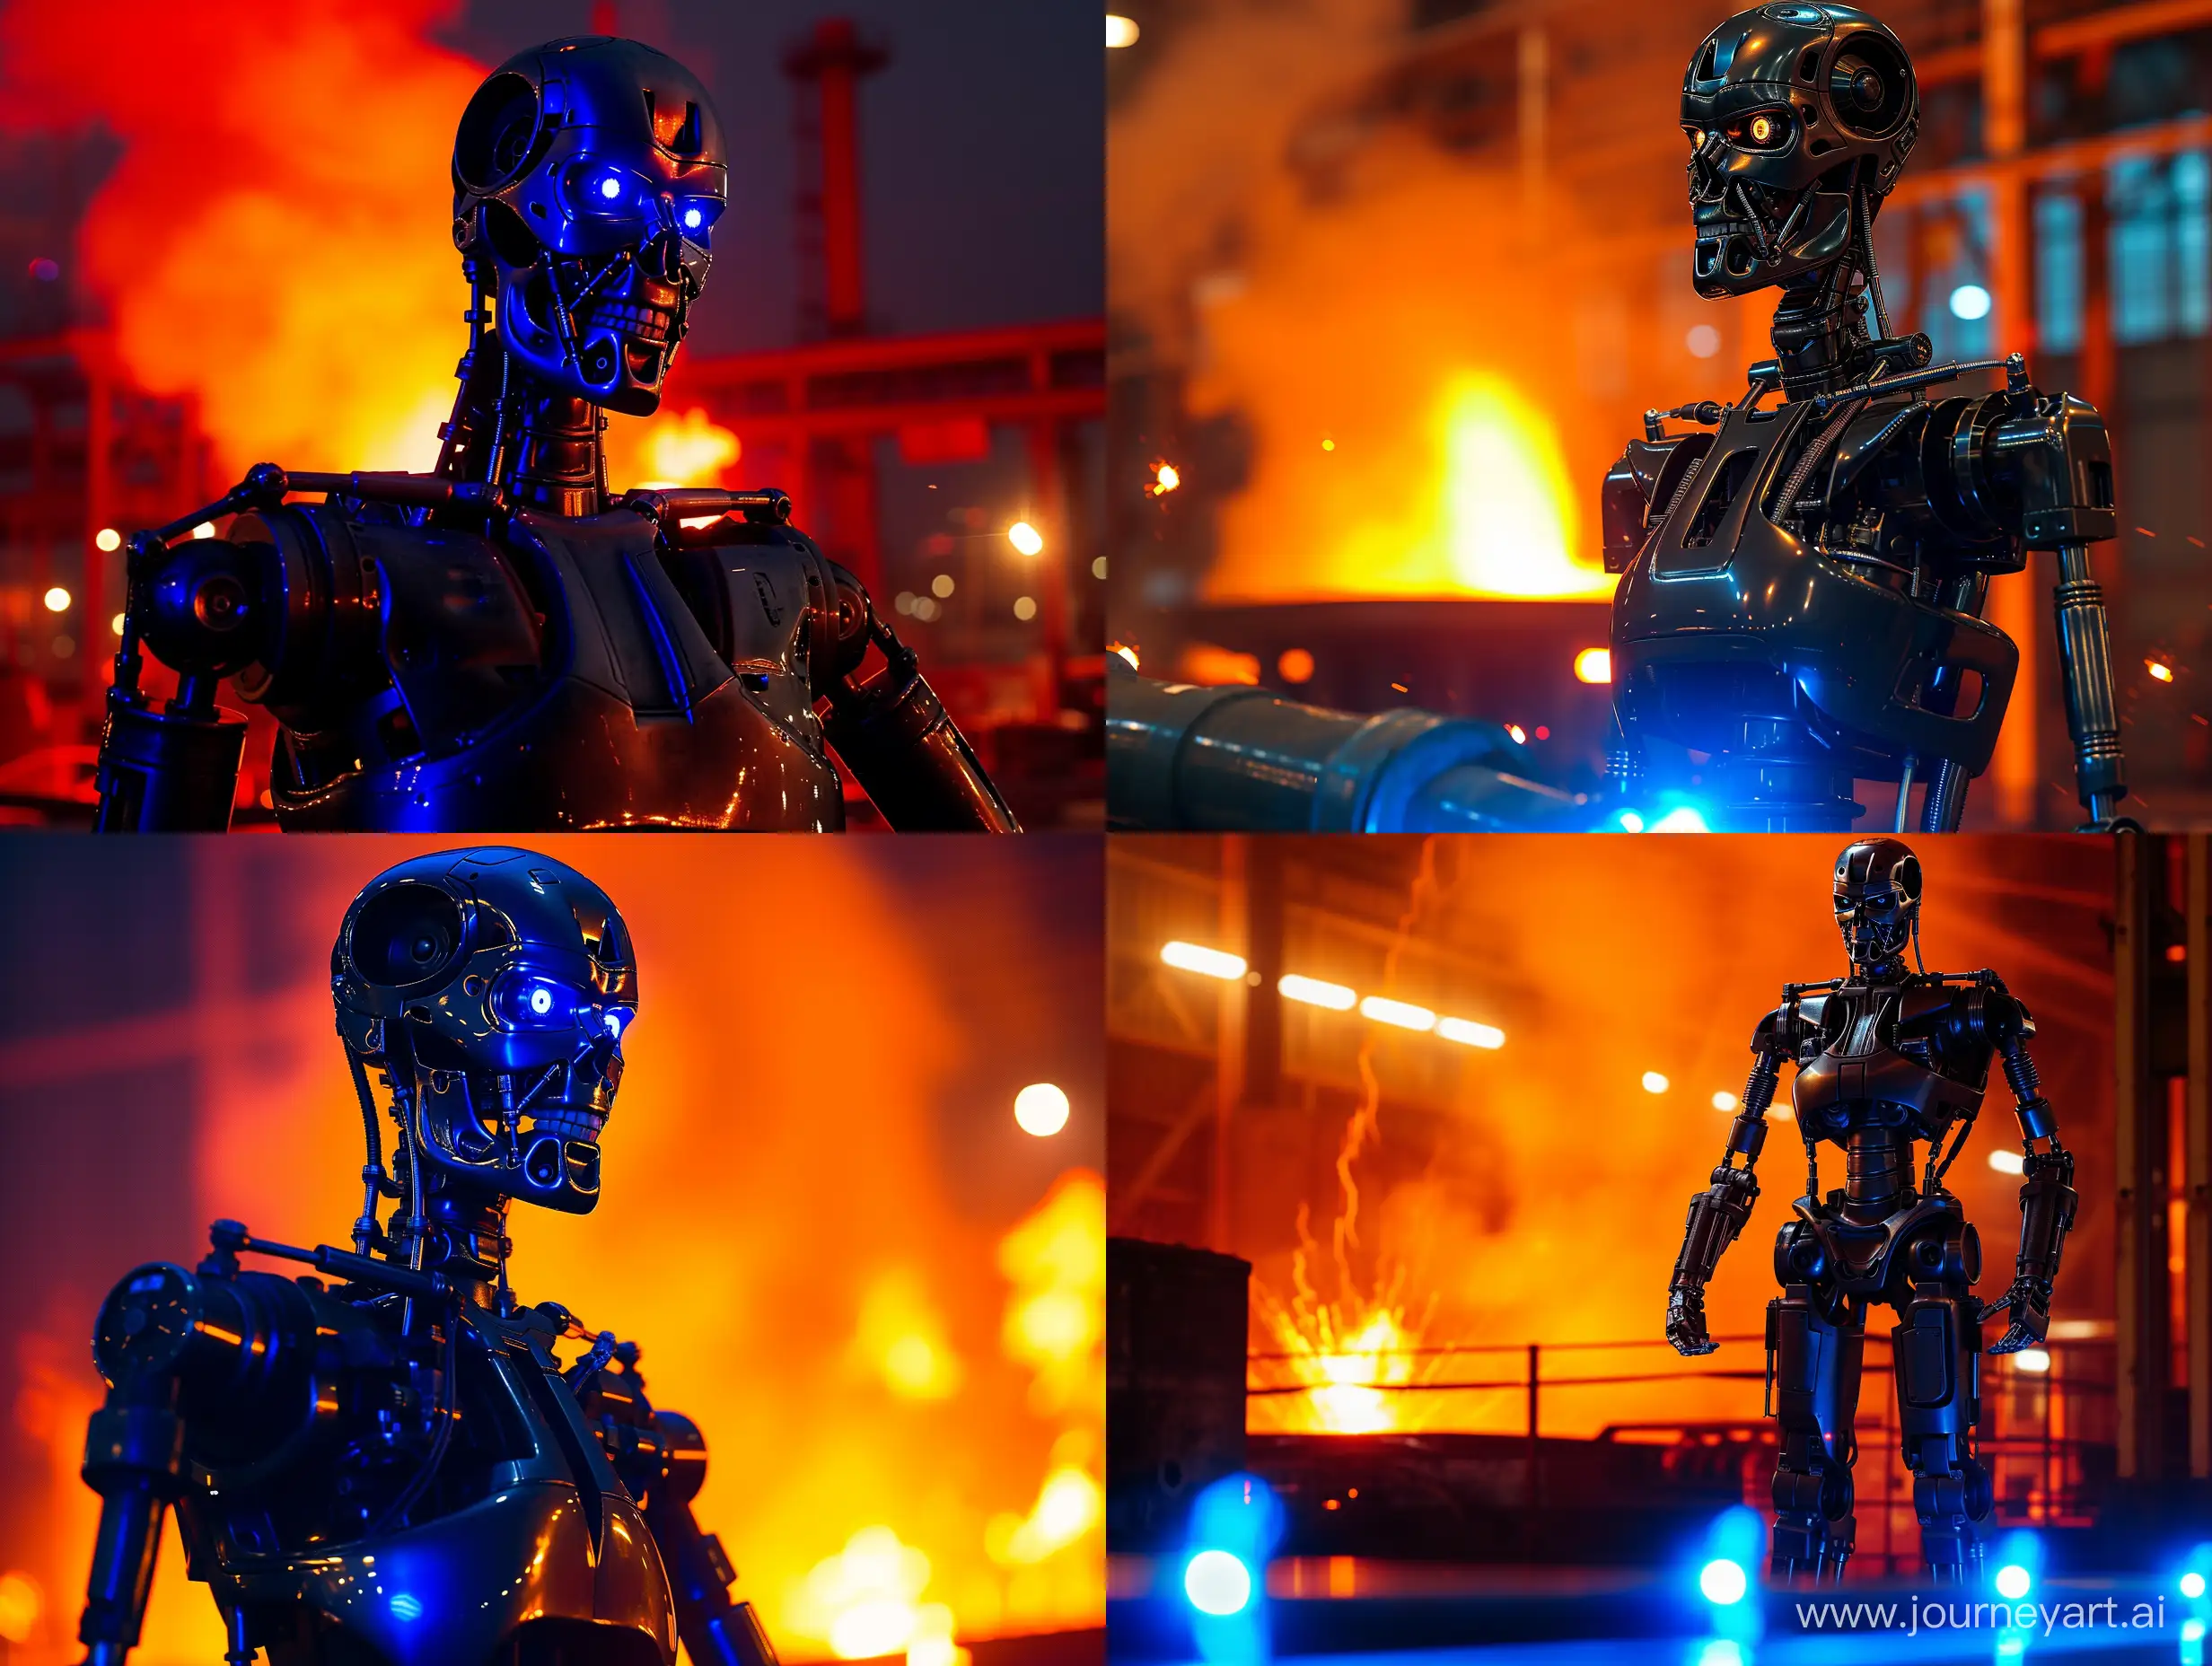 Terminator-Robot-in-Foundry-Menacing-Night-with-Orange-Flames-and-Blue-Glow